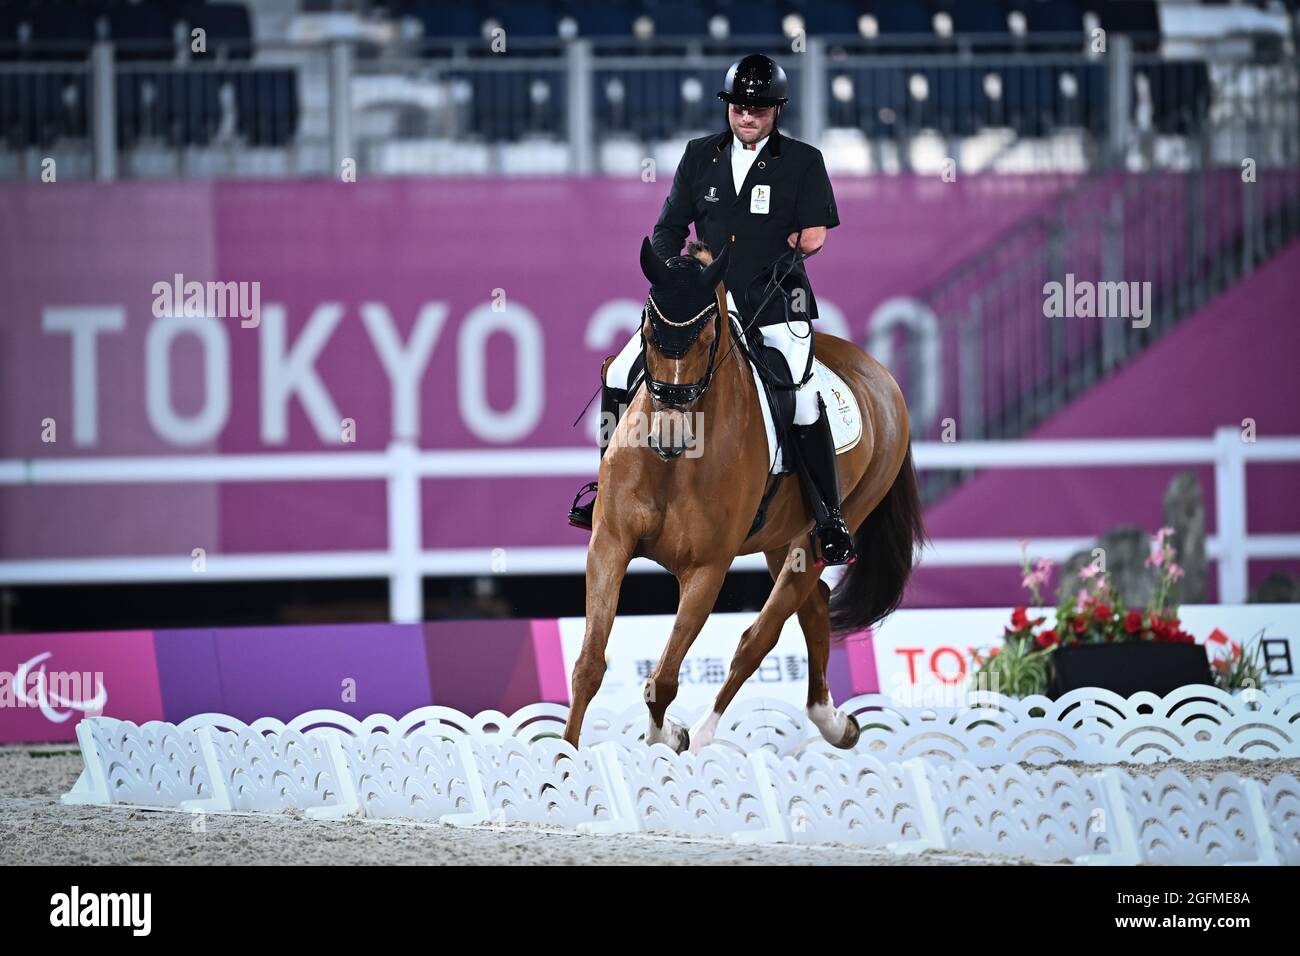 Kevin van Ham pictured in action during the Individual Test - Grade IV equestrian event on the second day of the Tokyo 2020 Paralympic Games, Thursday Stock Photo